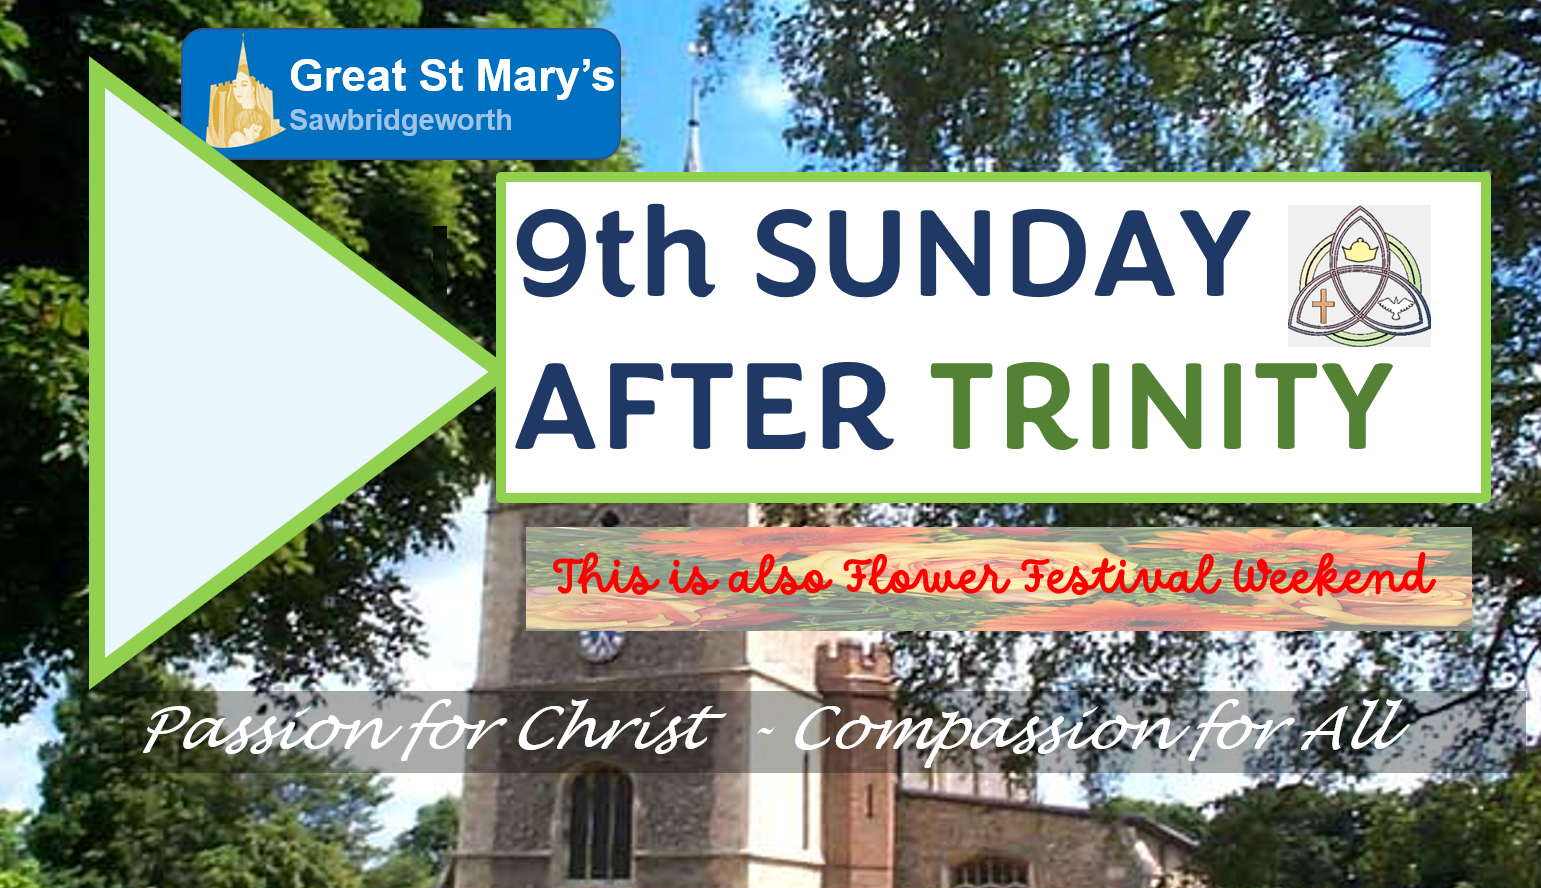 (th Sunday after Trinity Link